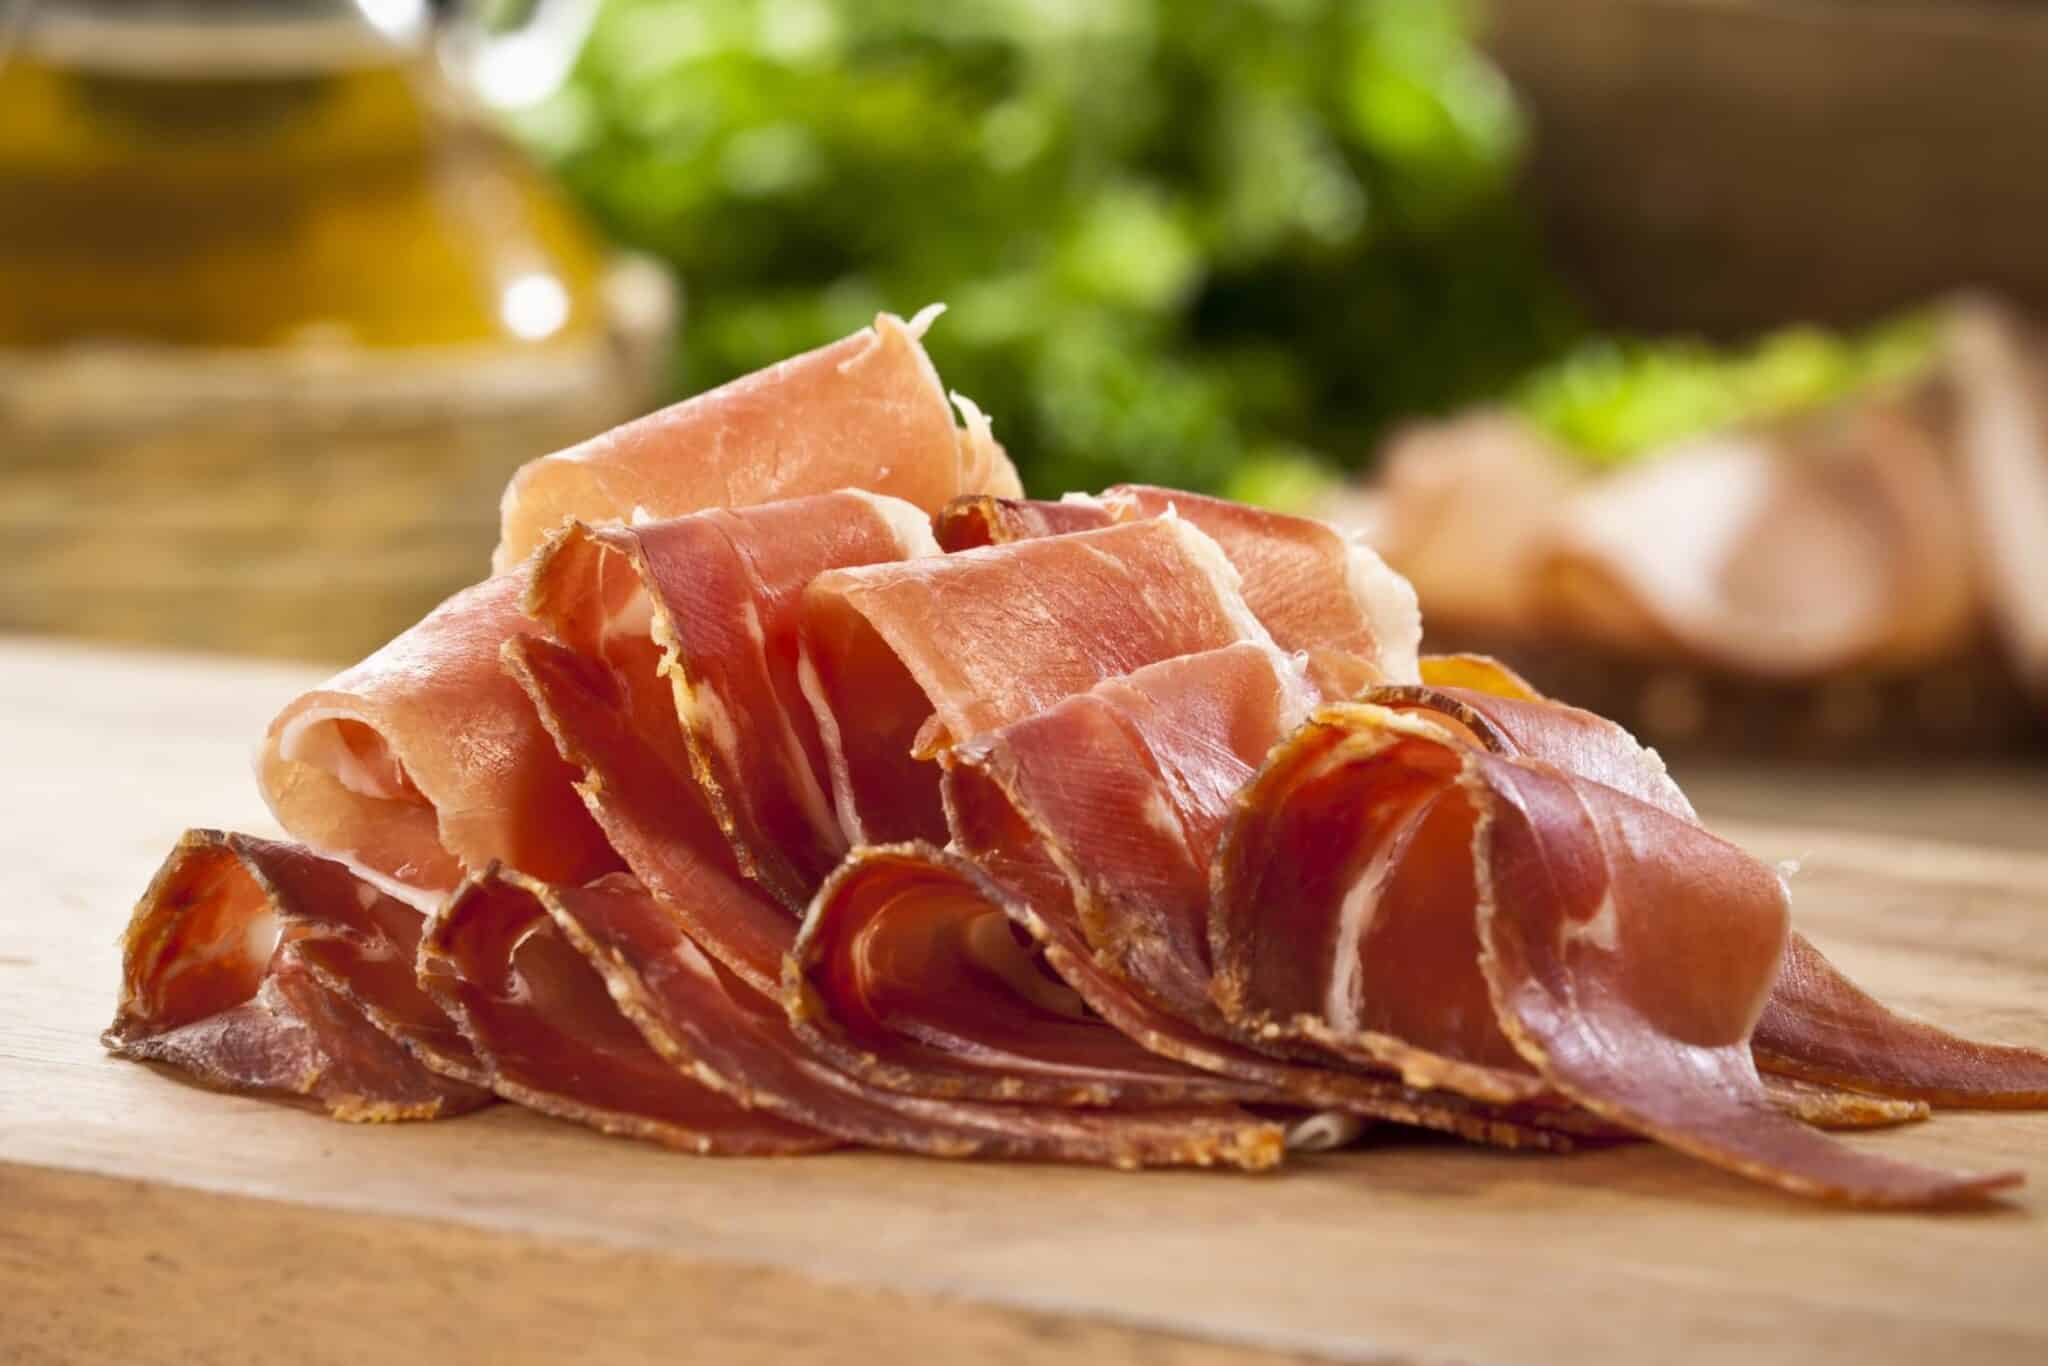 Can You Freeze Prosciutto?